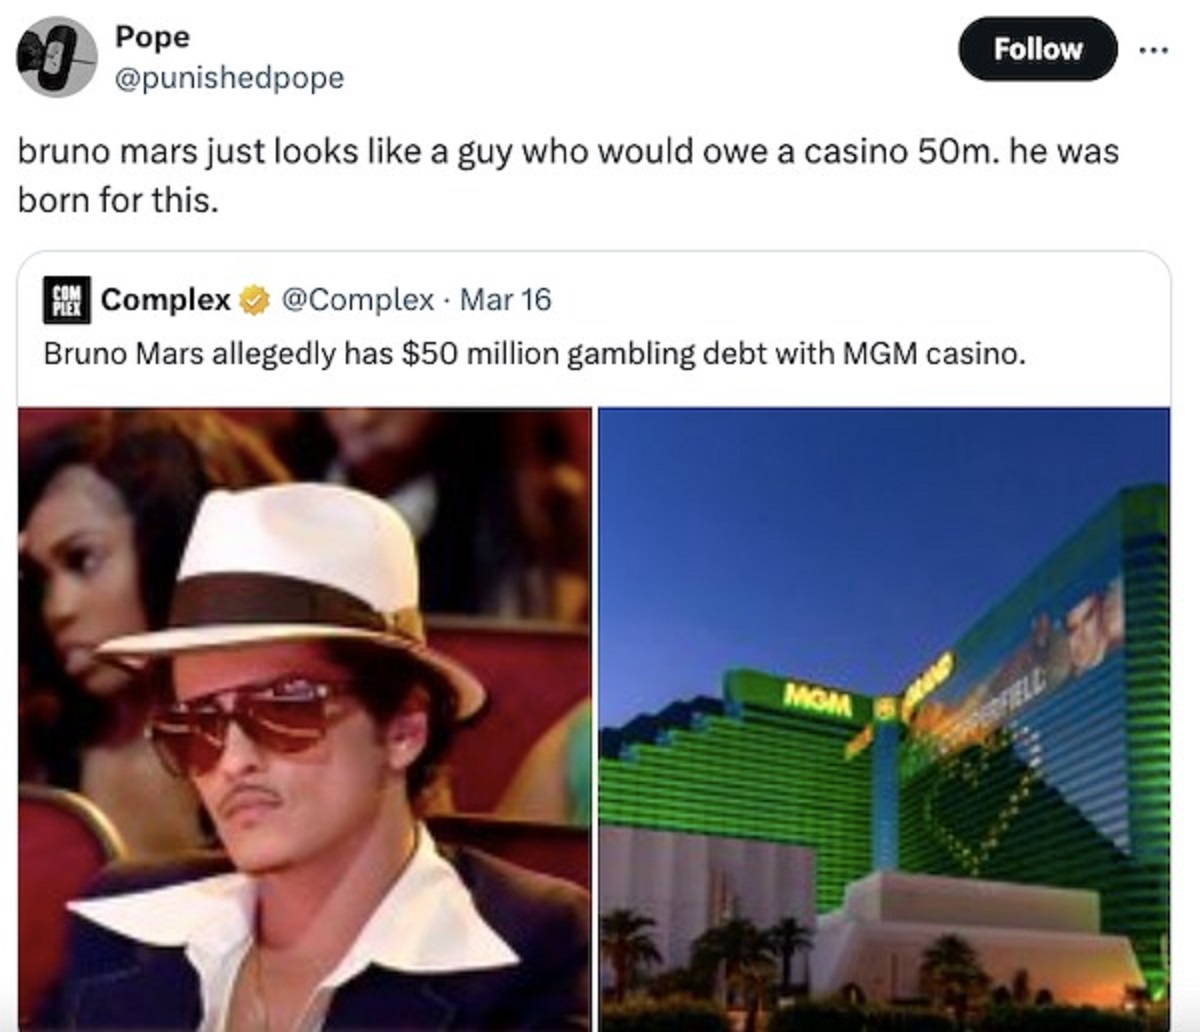 2022 bruno mars - Pope bruno mars just looks a guy who would owe a casino 50m. he was born for this. Com Complex Mar 16 Bruno Mars allegedly has $50 million gambling debt with Mgm casino. Mom